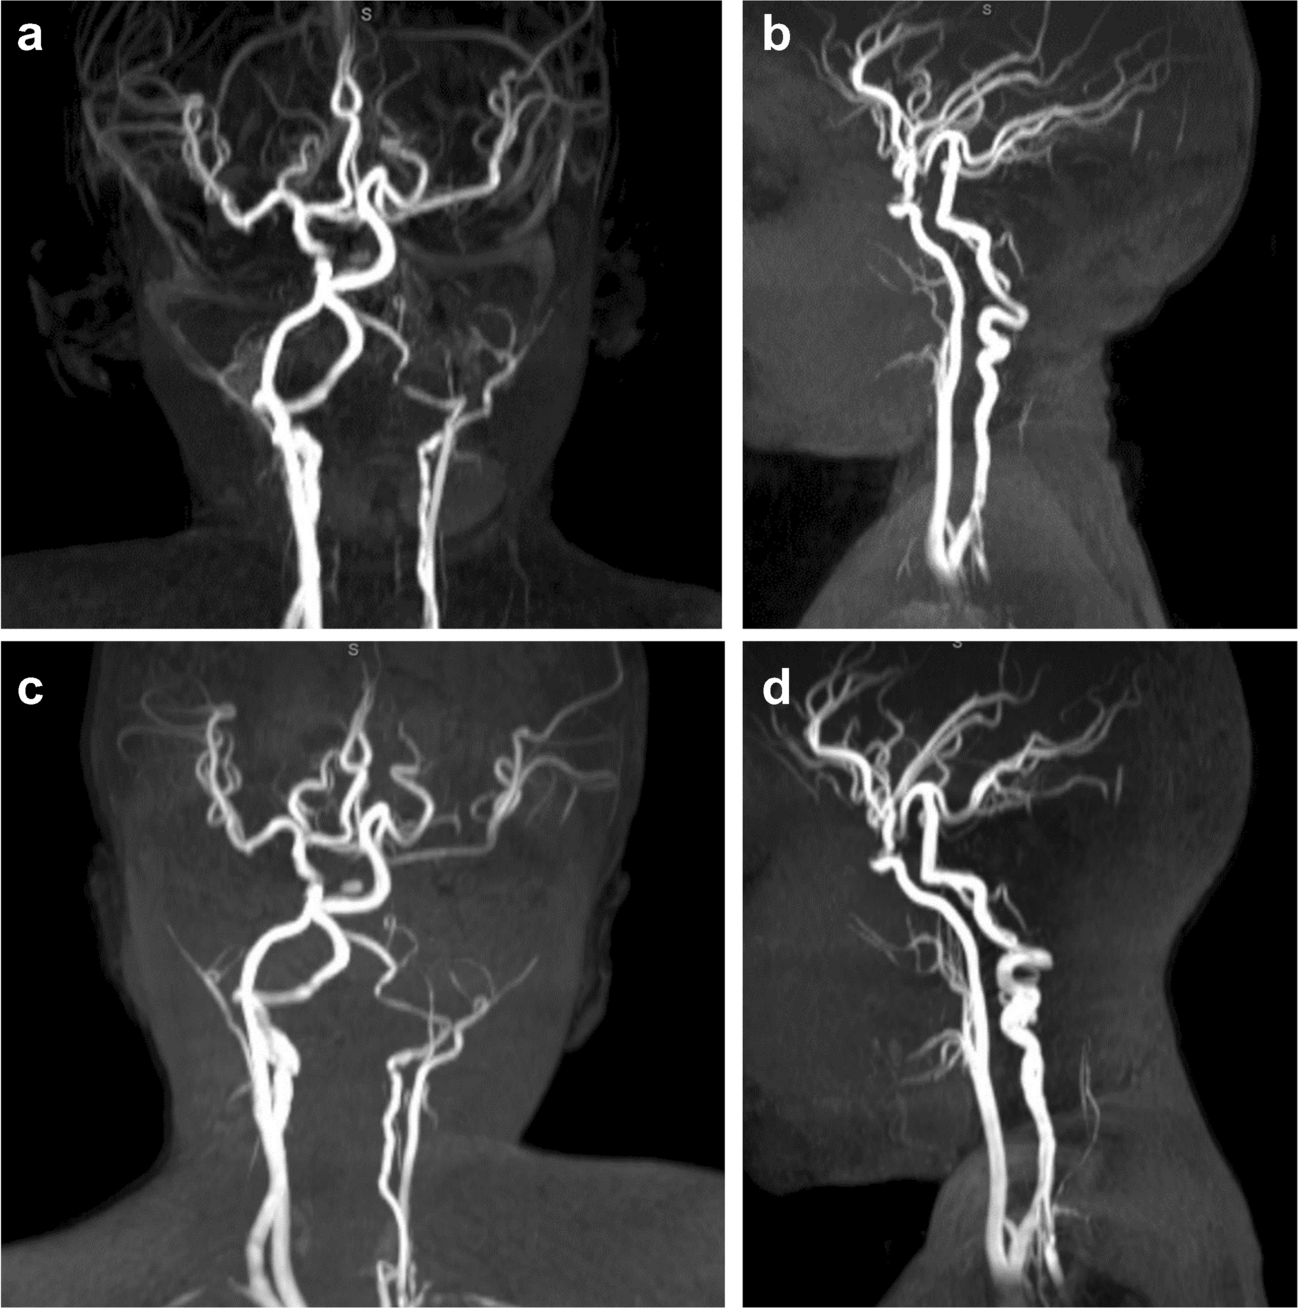 Evolution of cerebrovascular imaging and associated clinical findings in children with Alagille syndrome